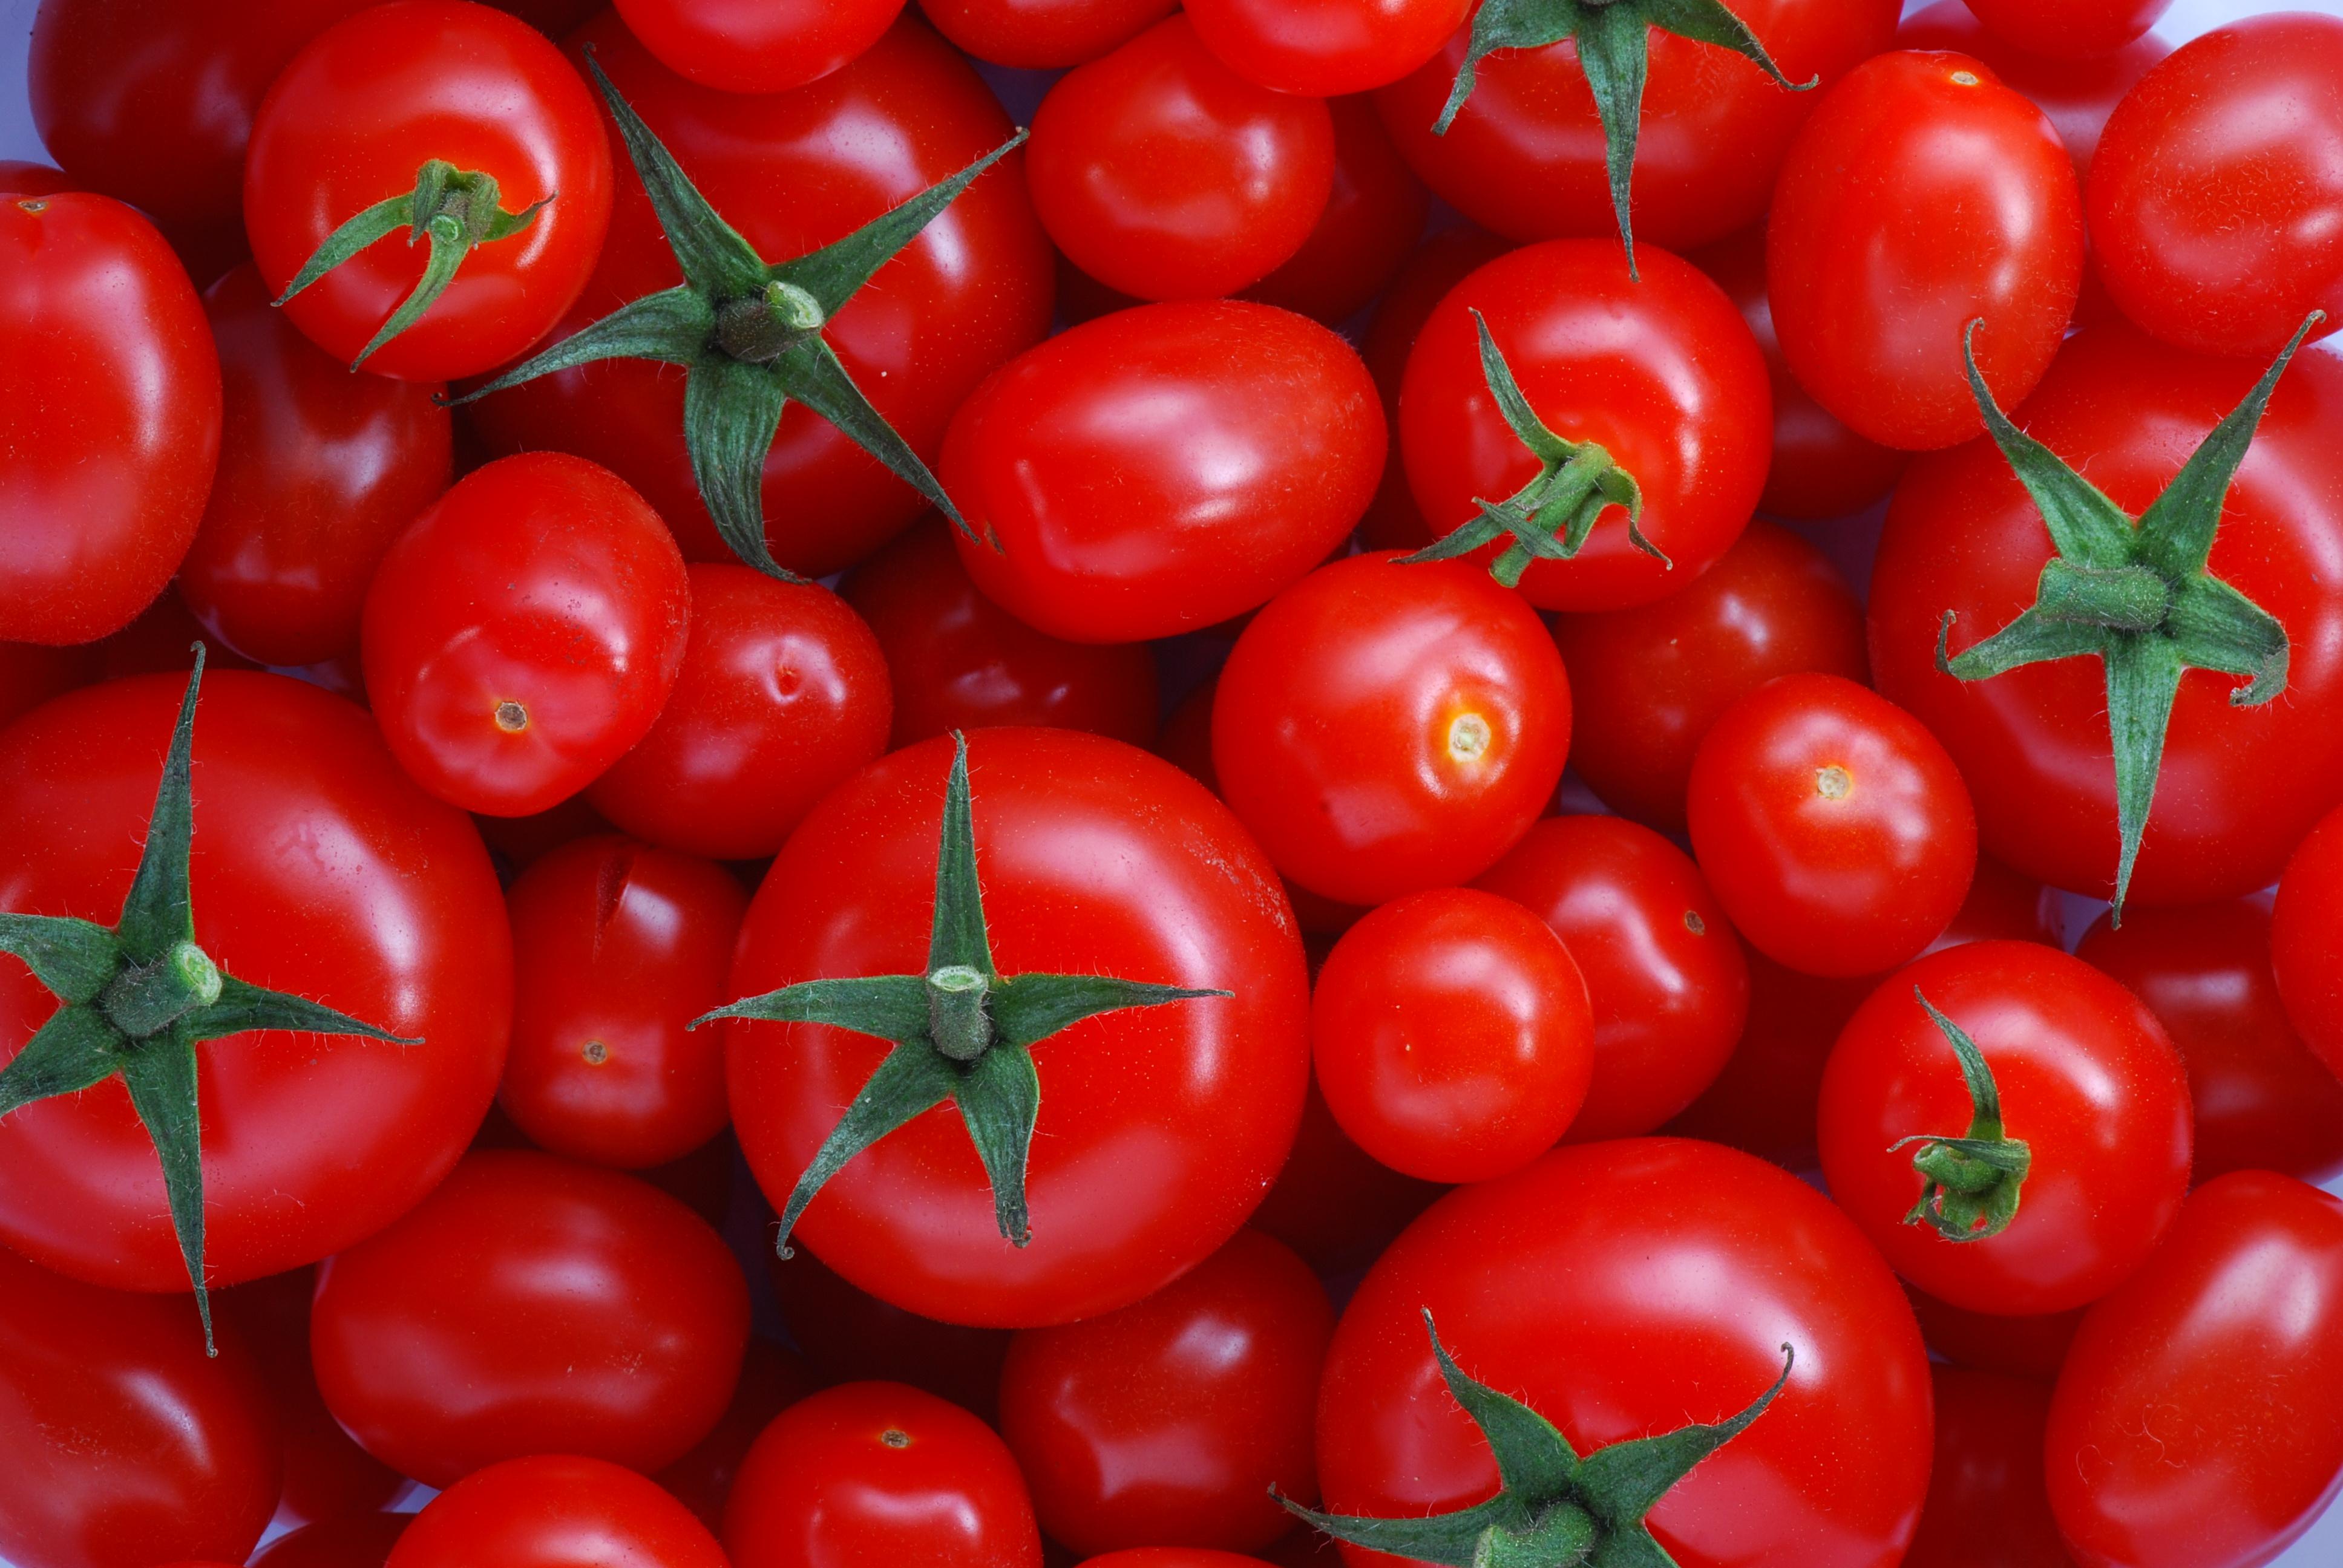 Certain foods like tomatoes and oranges can cause GERD symptoms.